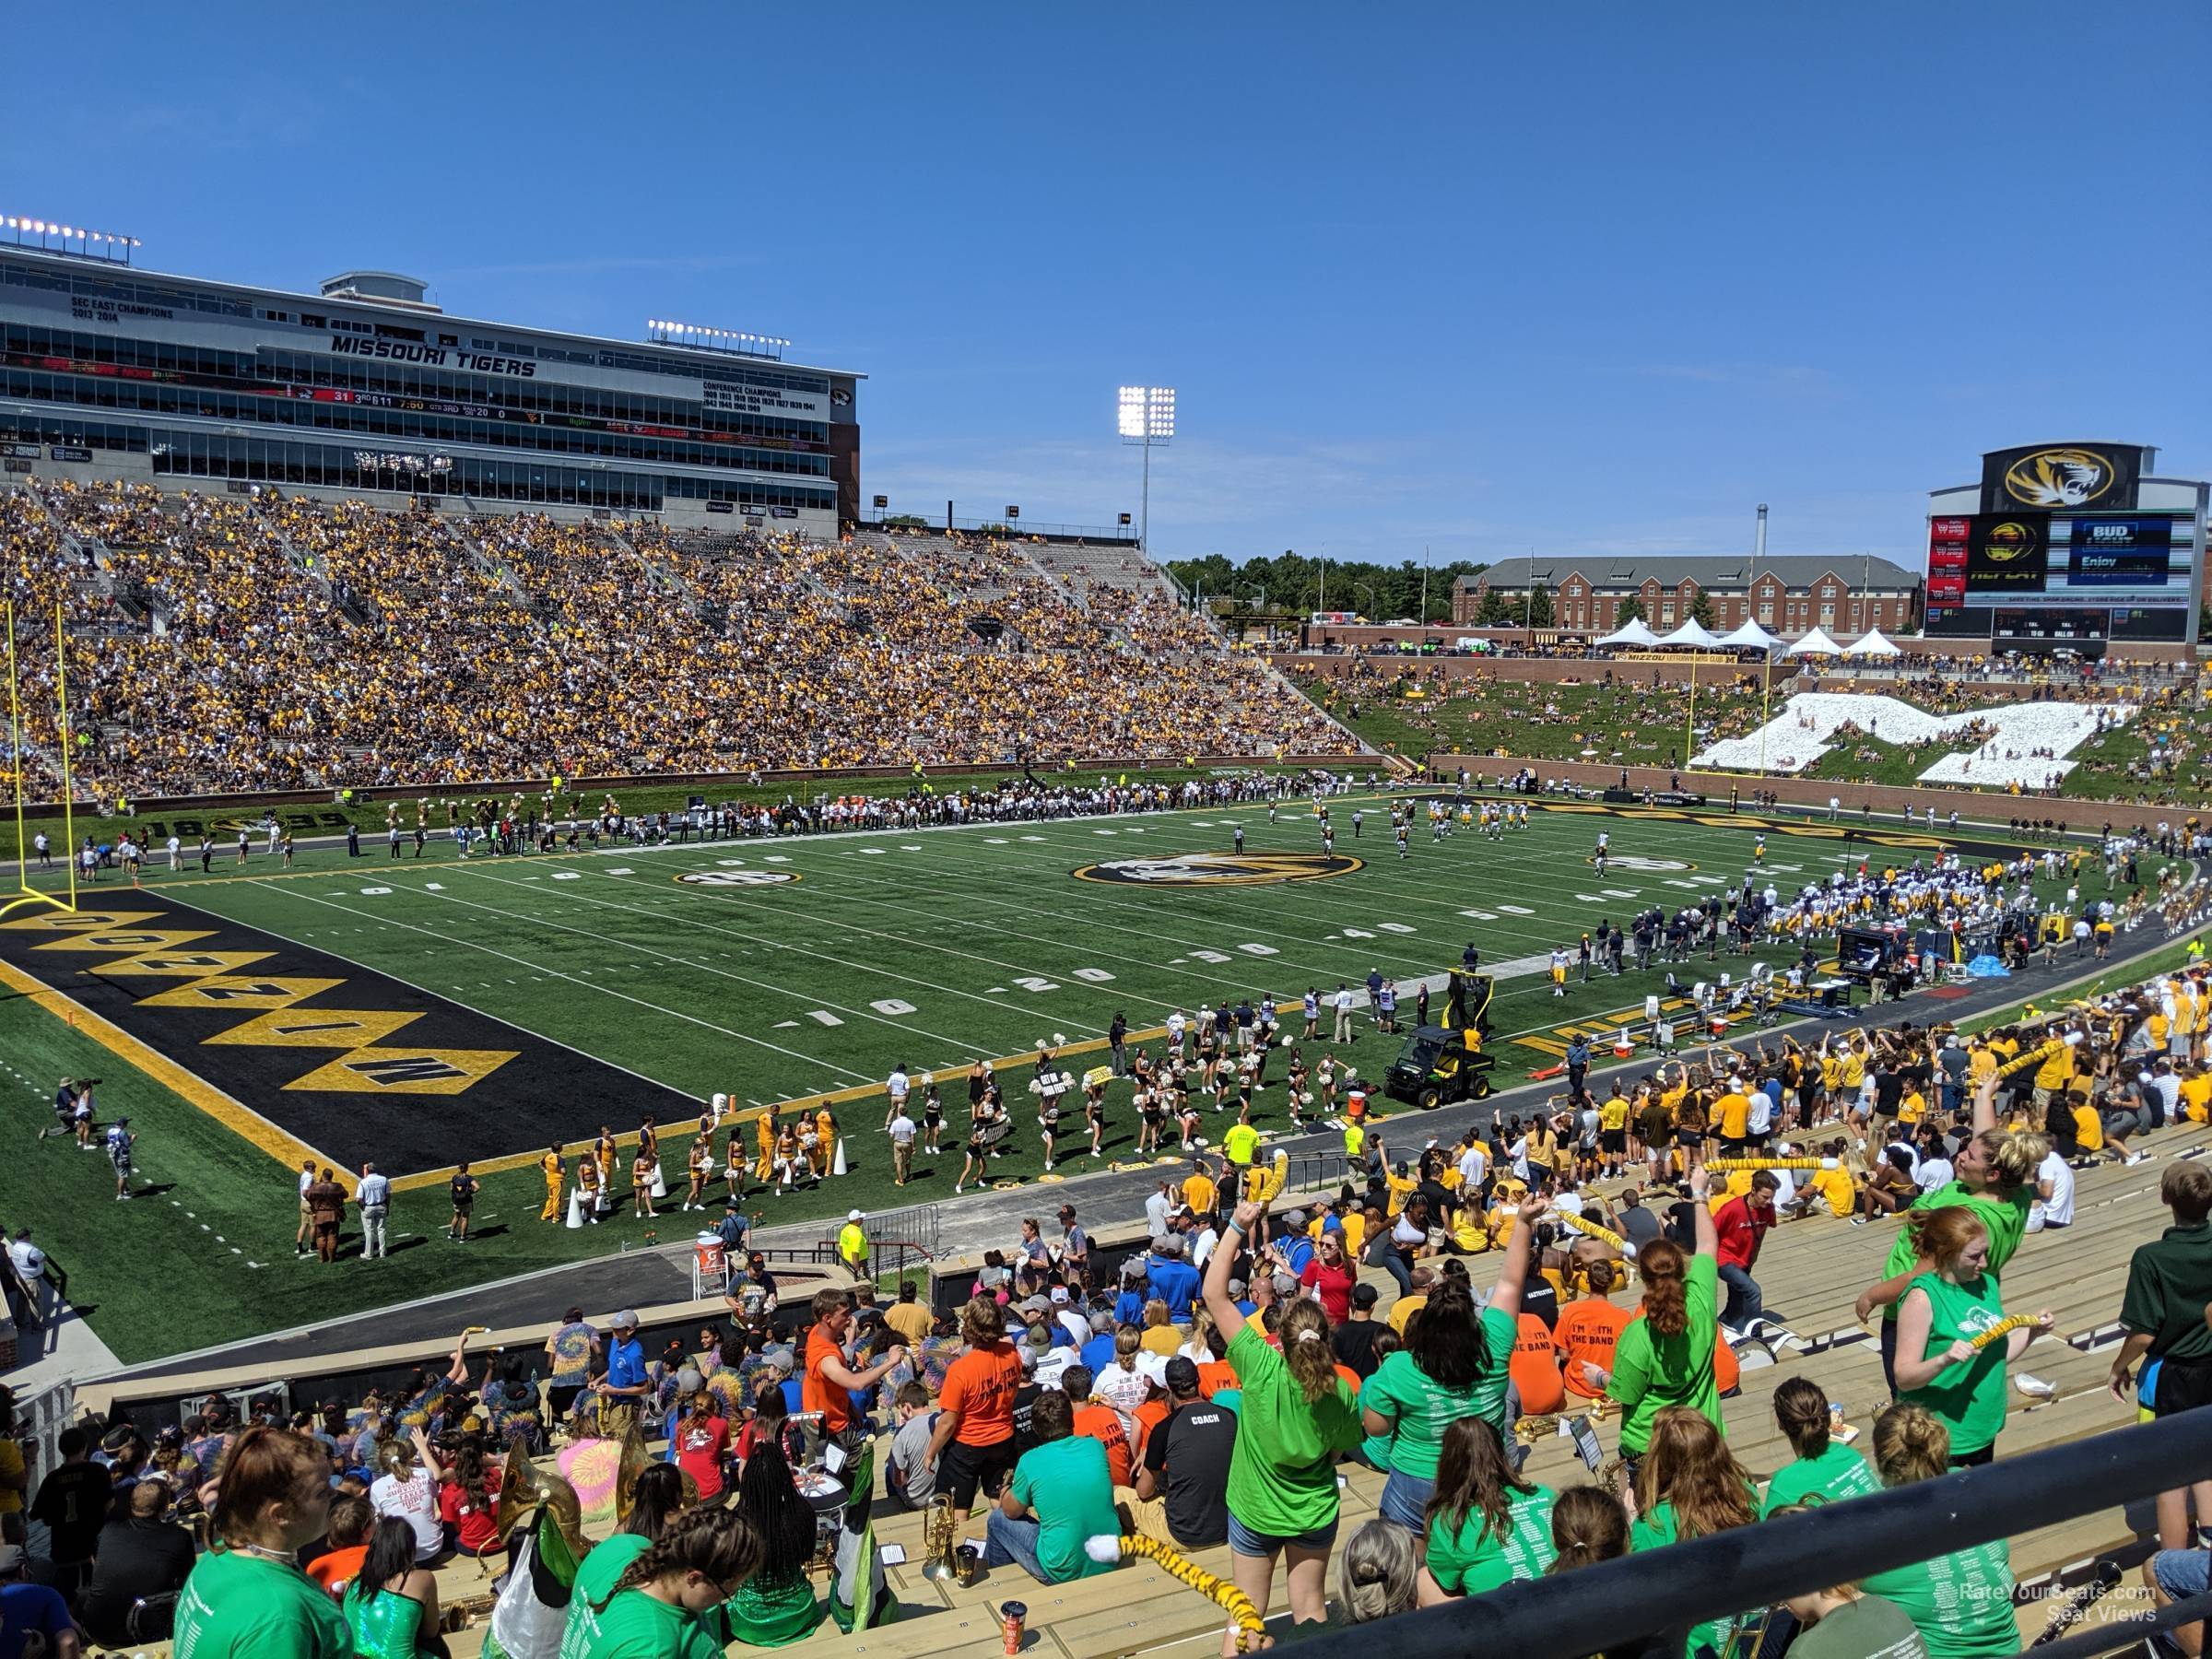 section 101, row 38 seat view  - faurot field